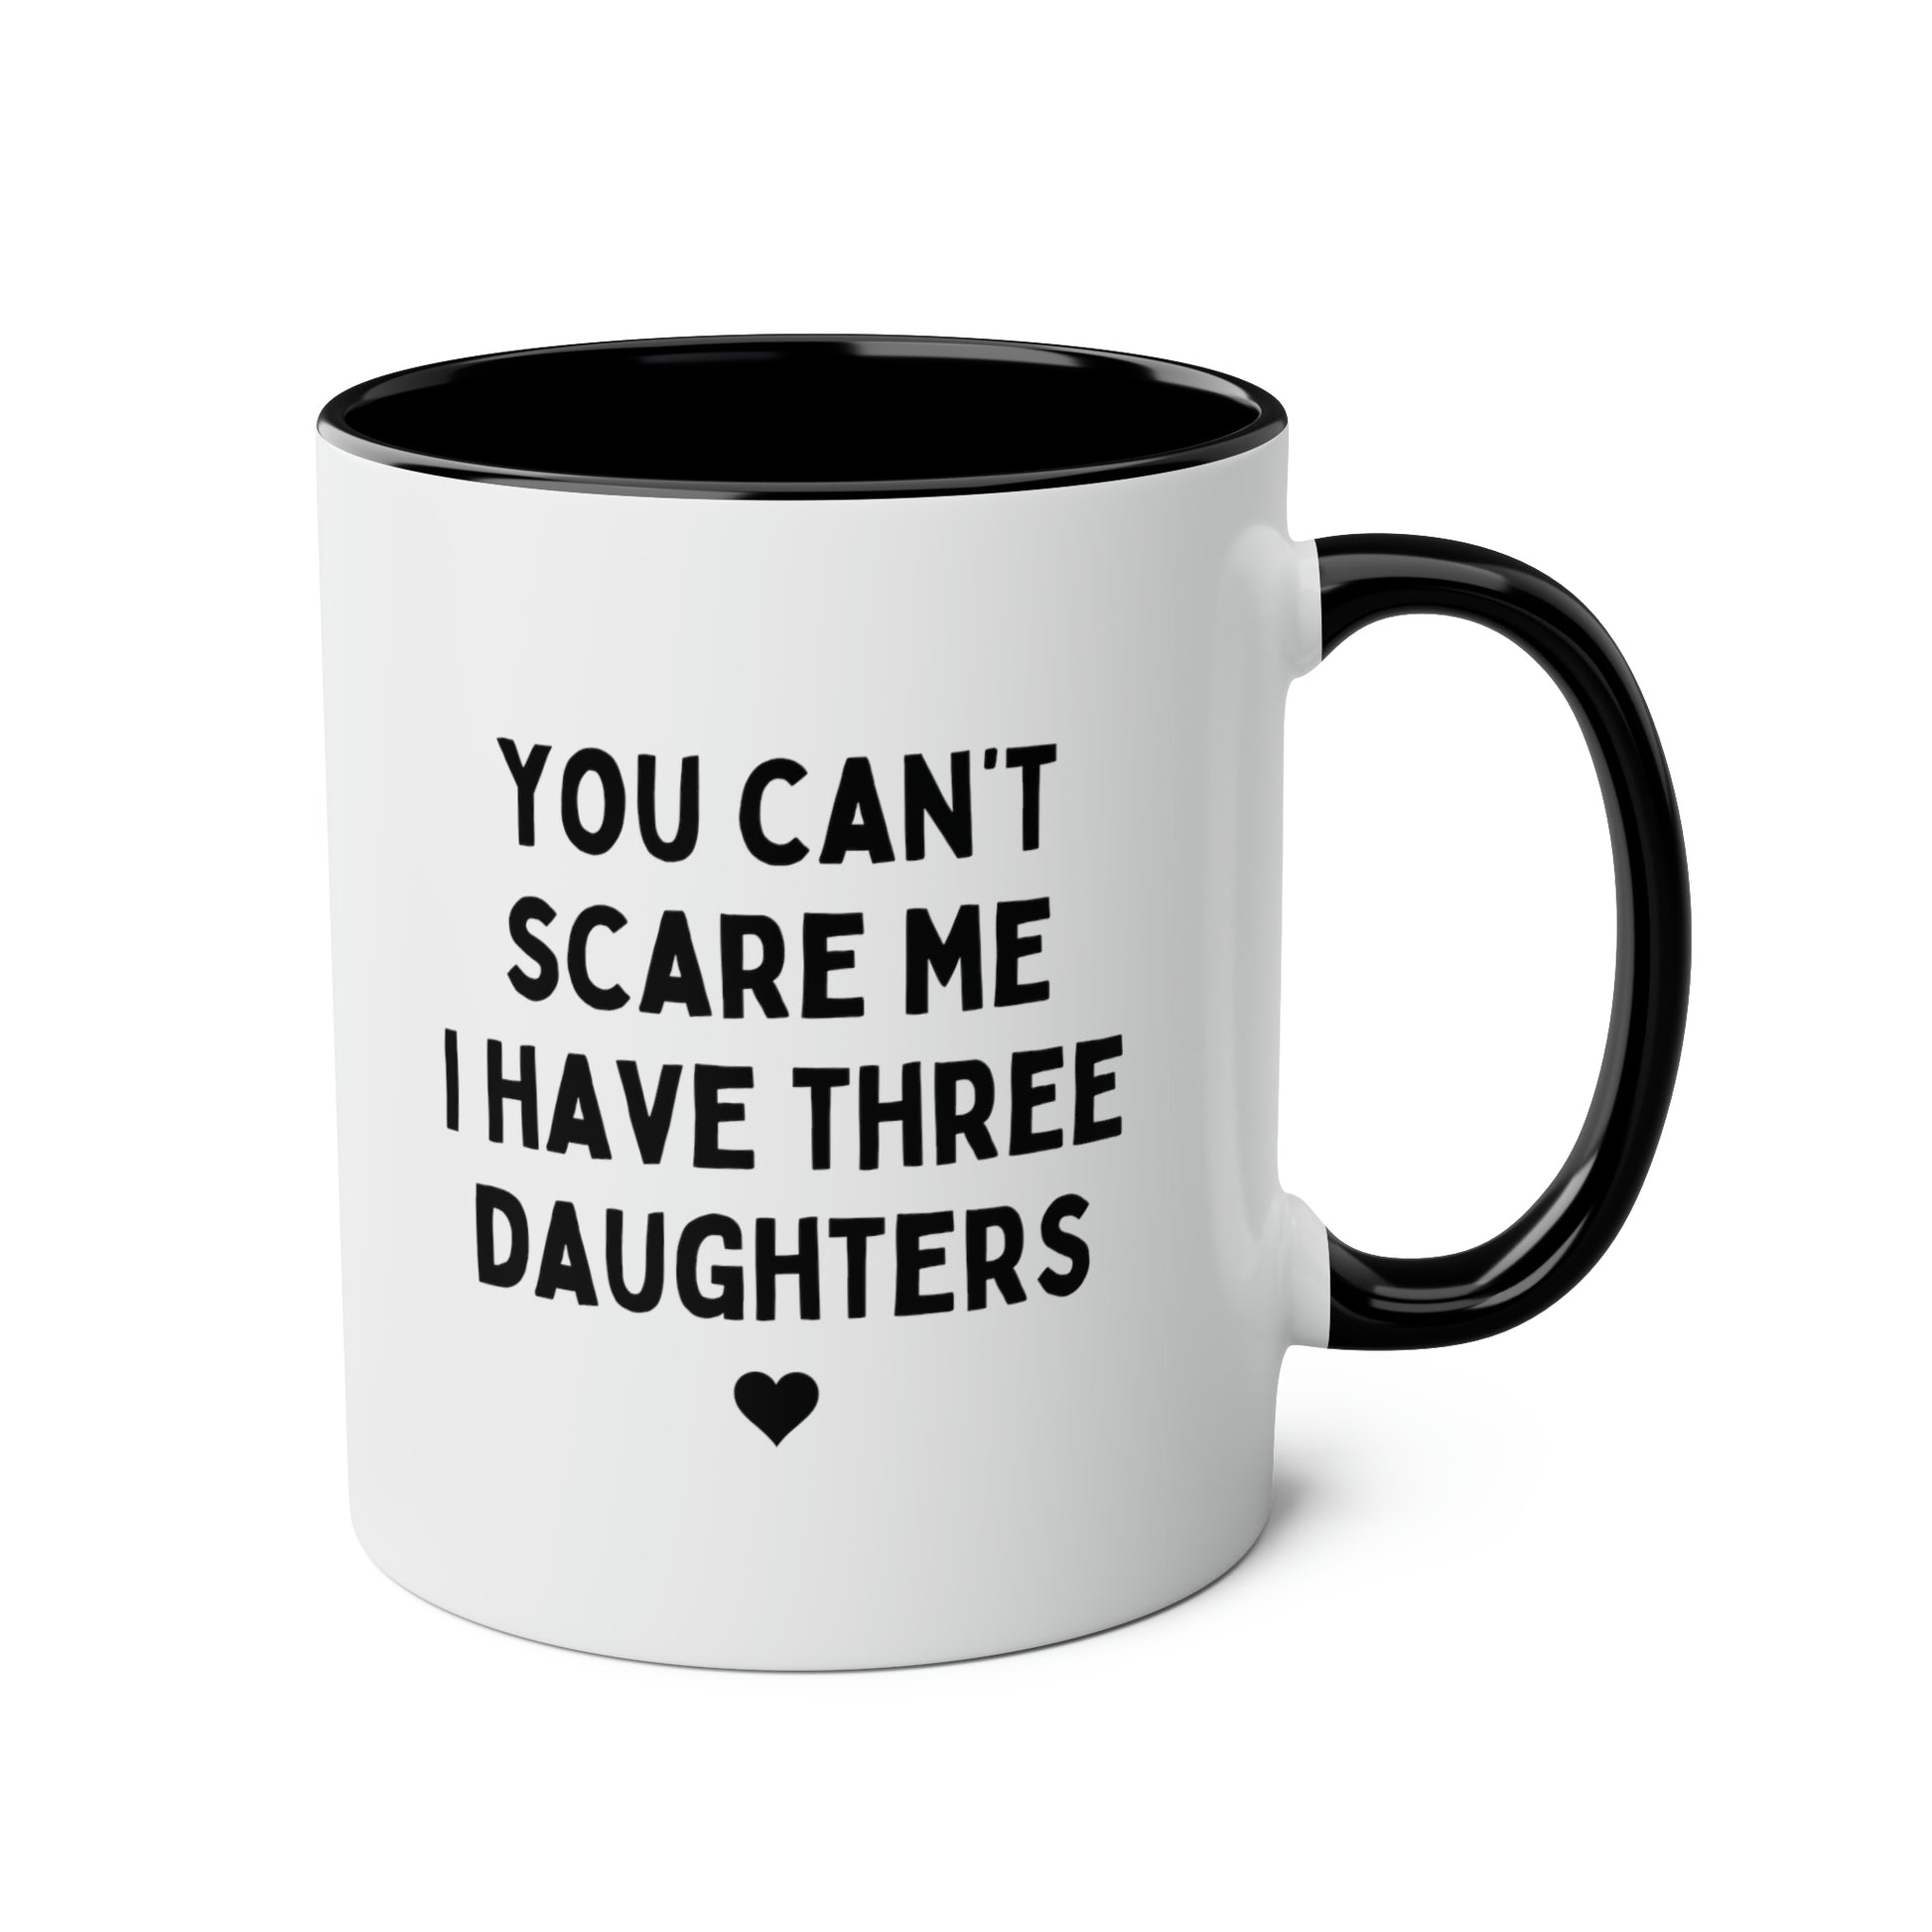 You Can't Scare Me I have Three Daughters 11oz white with black accent funny large coffee mug gift for fathers day dad husband grandpa tea cup waveywares wavey wares wavywares wavy wares